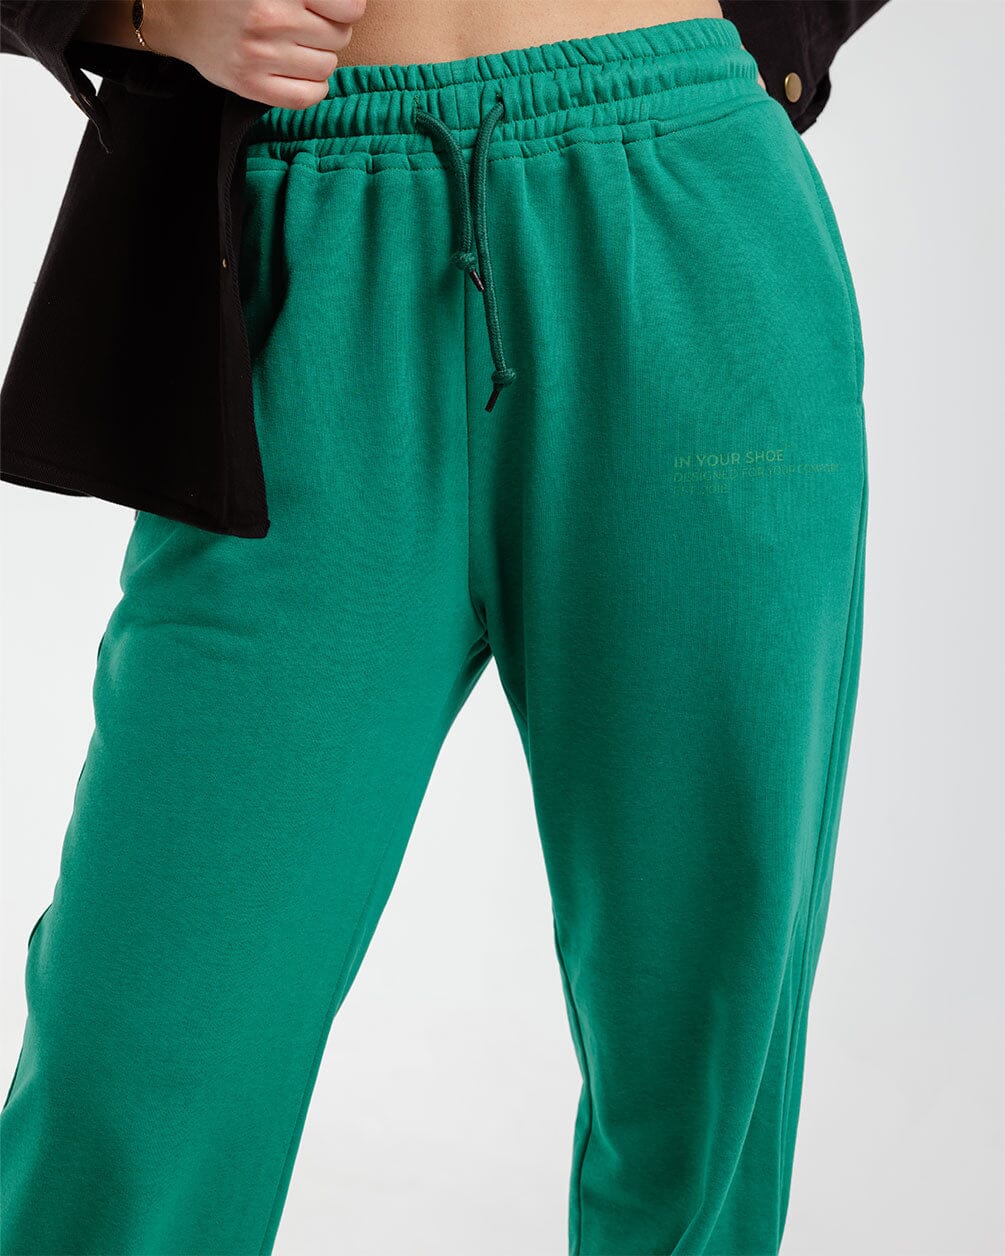 Green Straight Swants (Sweatpants) Swants IN YOUR SHOE S 